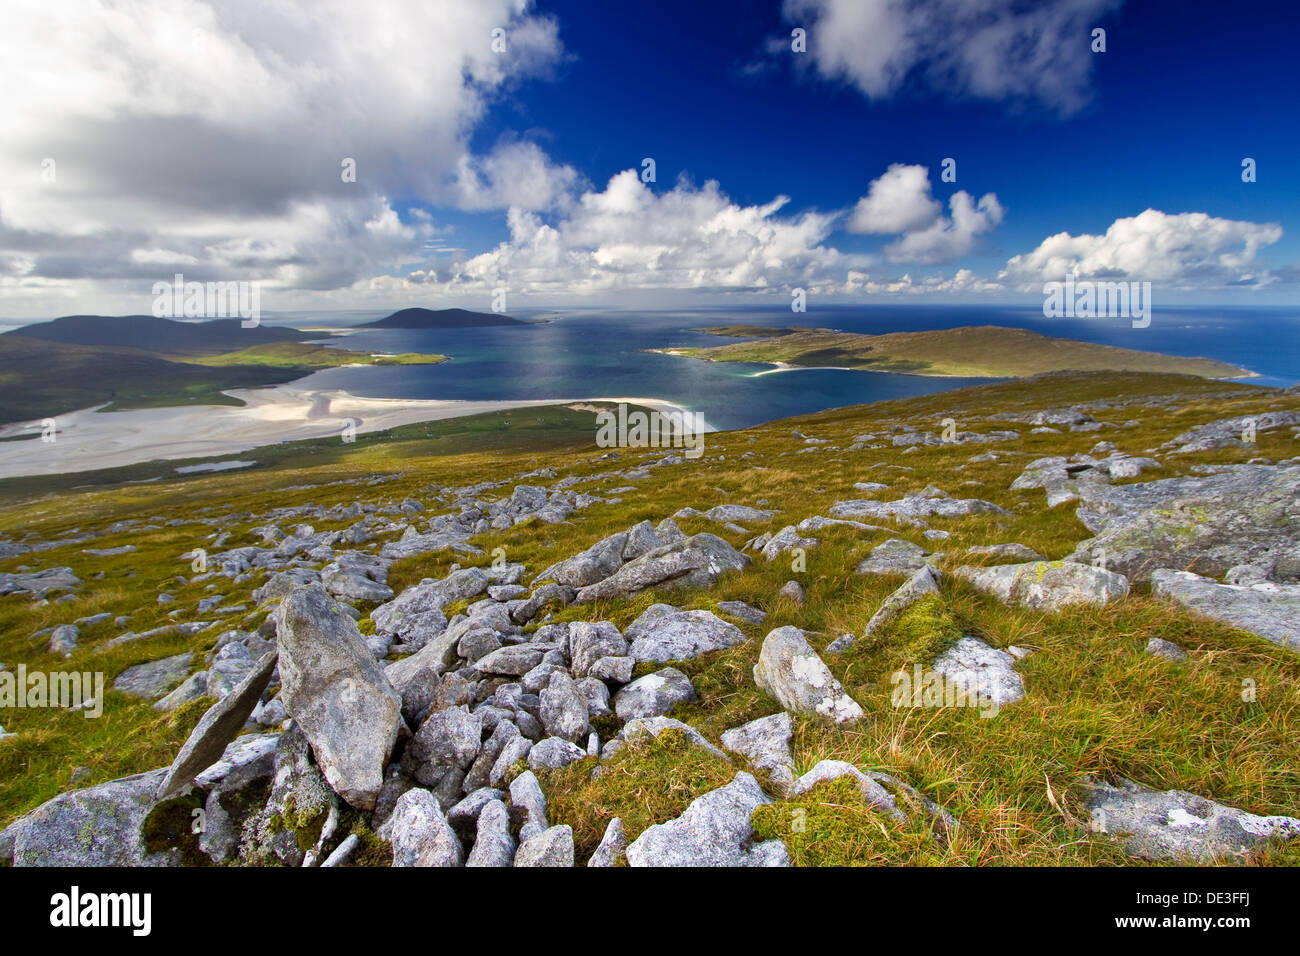 A view from the summit Beinn Dhubh over Luskentyre beach and the Isle of Taransay, on the Isle Harris, Scotland Stock Photo